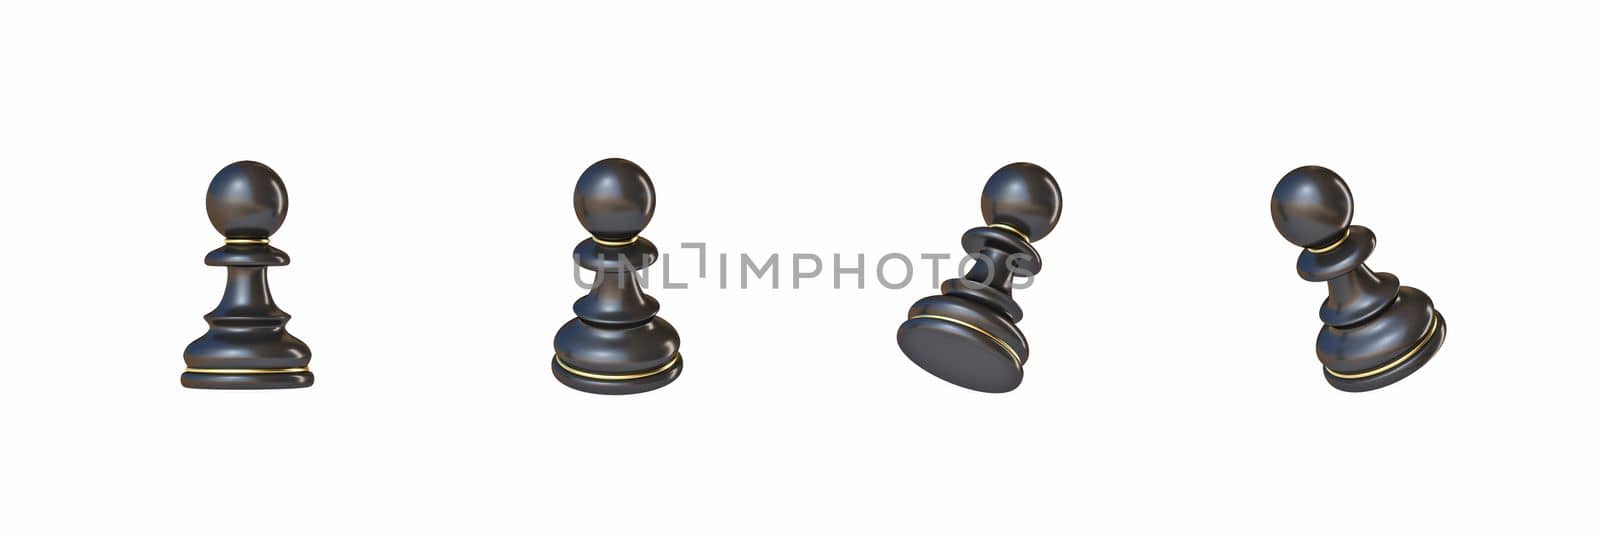 Black chess Pawn in four different angled views 3D by djmilic